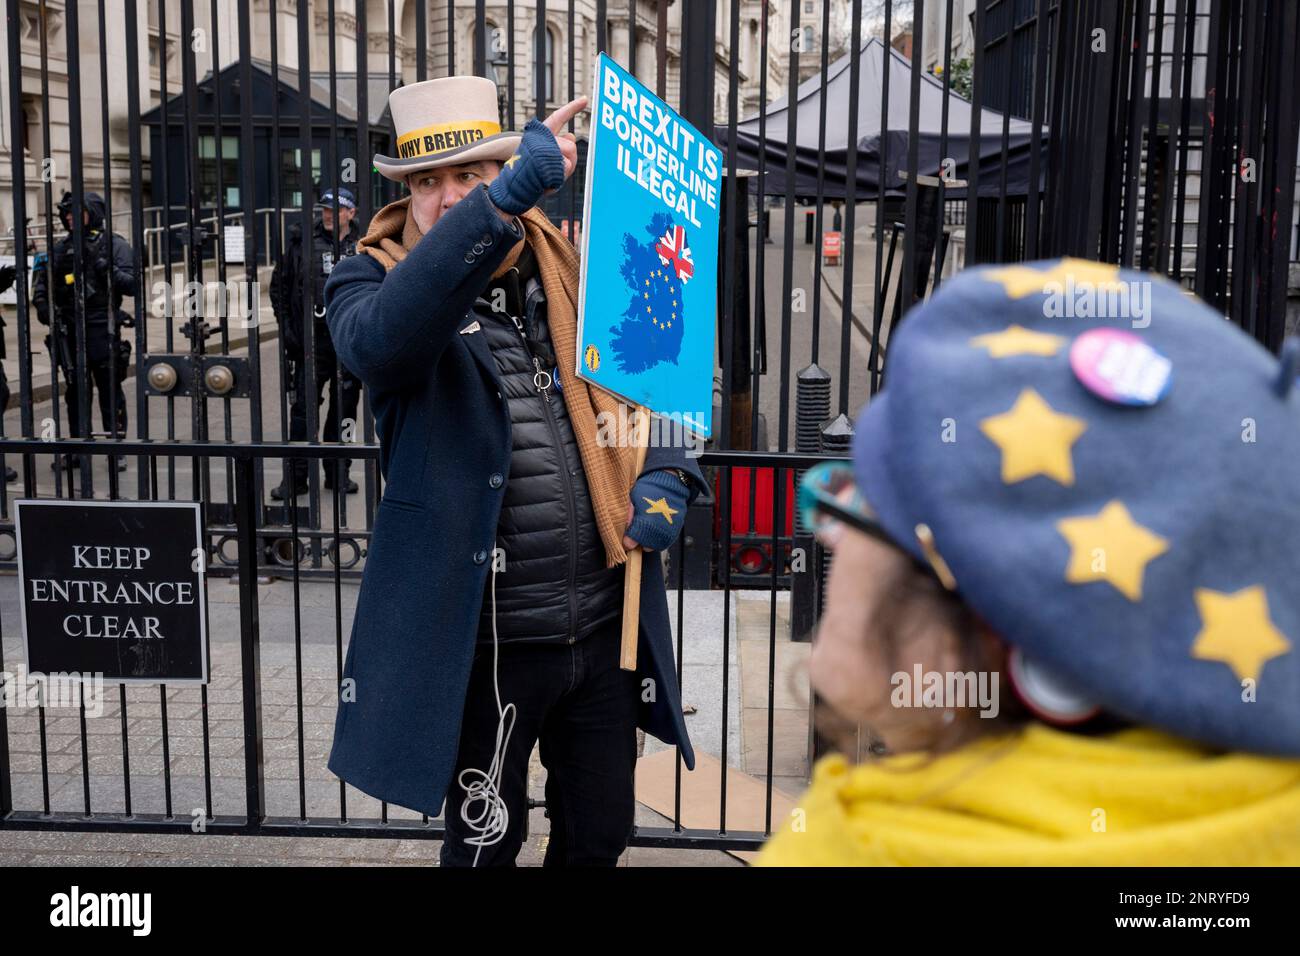 On the day that British Prime Minister Rushi Sunak's government finally reached a post-Brexit trade deal with the EU, a renegotiation of the Northern Irish Protocol, notable anti-Brexit campaigner, Steve Bray protests at the gates to Downing Street, on 27th February 2023, in London, England. Stock Photo